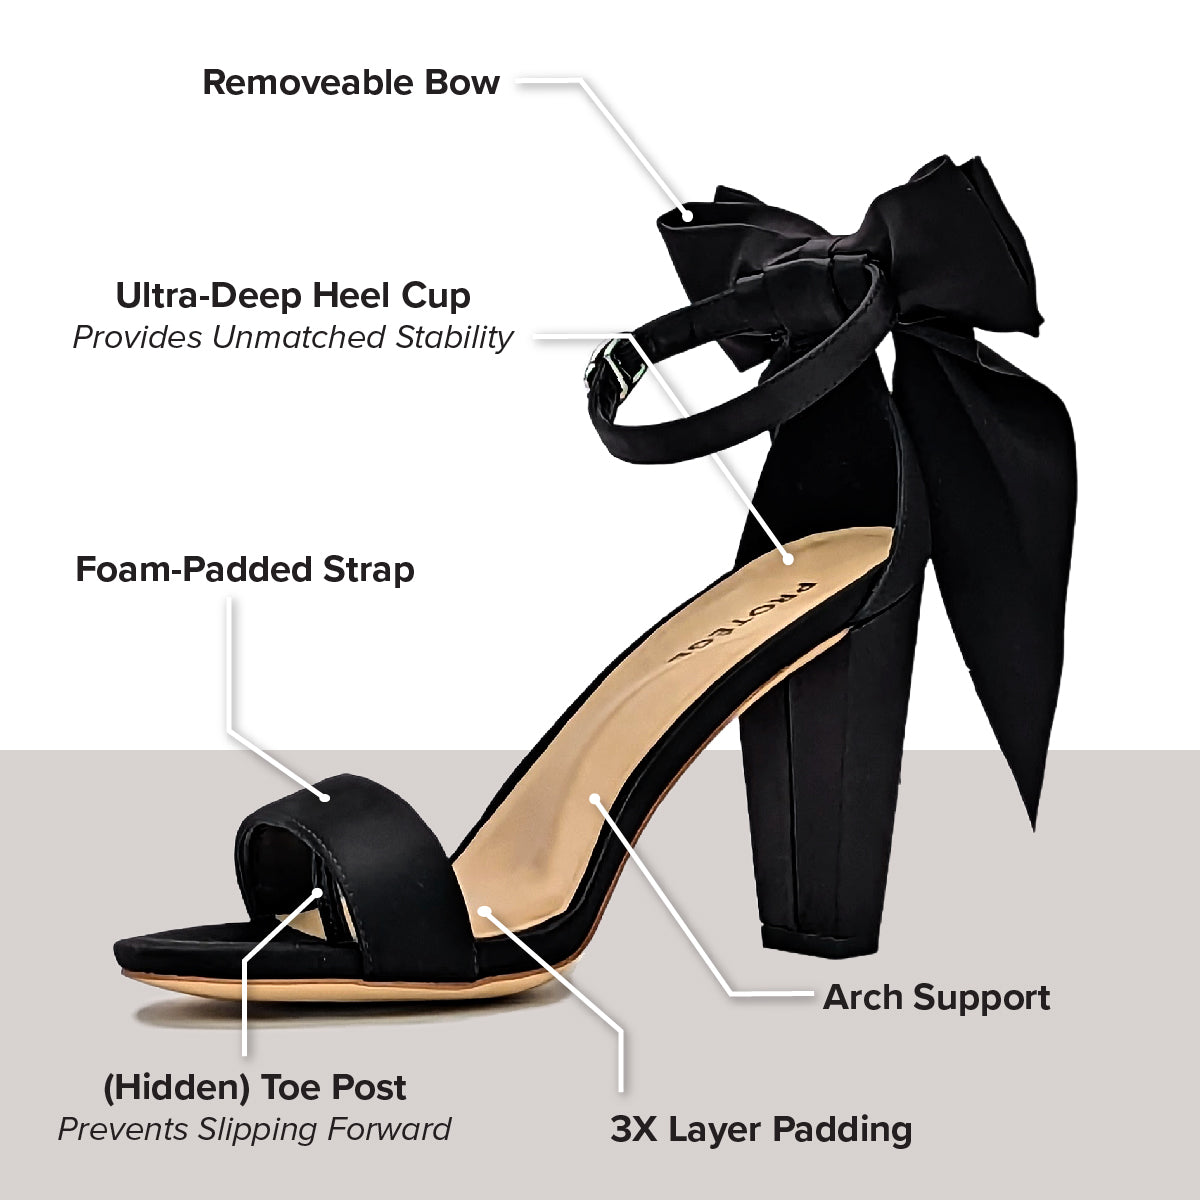 Are high heels bad for your feet? | Women's shoes | The Guardian